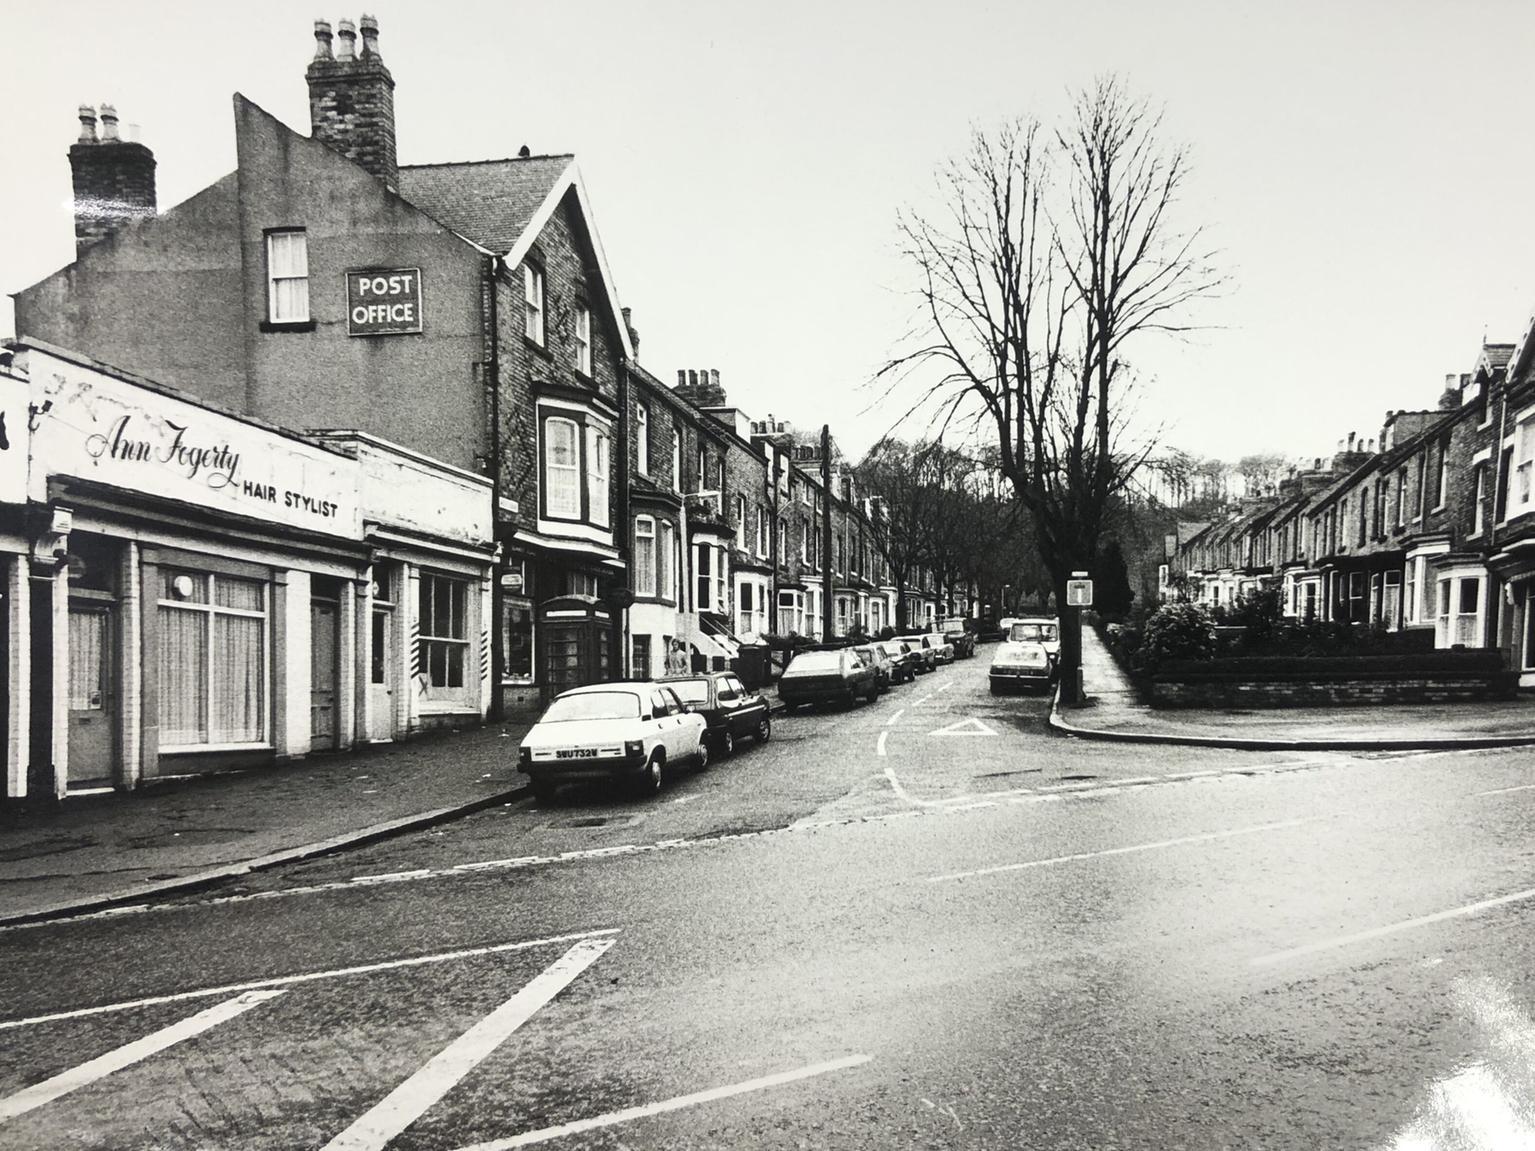 This corner has changed quite a lot since this picture was taken. New flats now stand where the hair stylist was and the Post Office is an accountants. There was no date on this picture - do you know which era it is from?